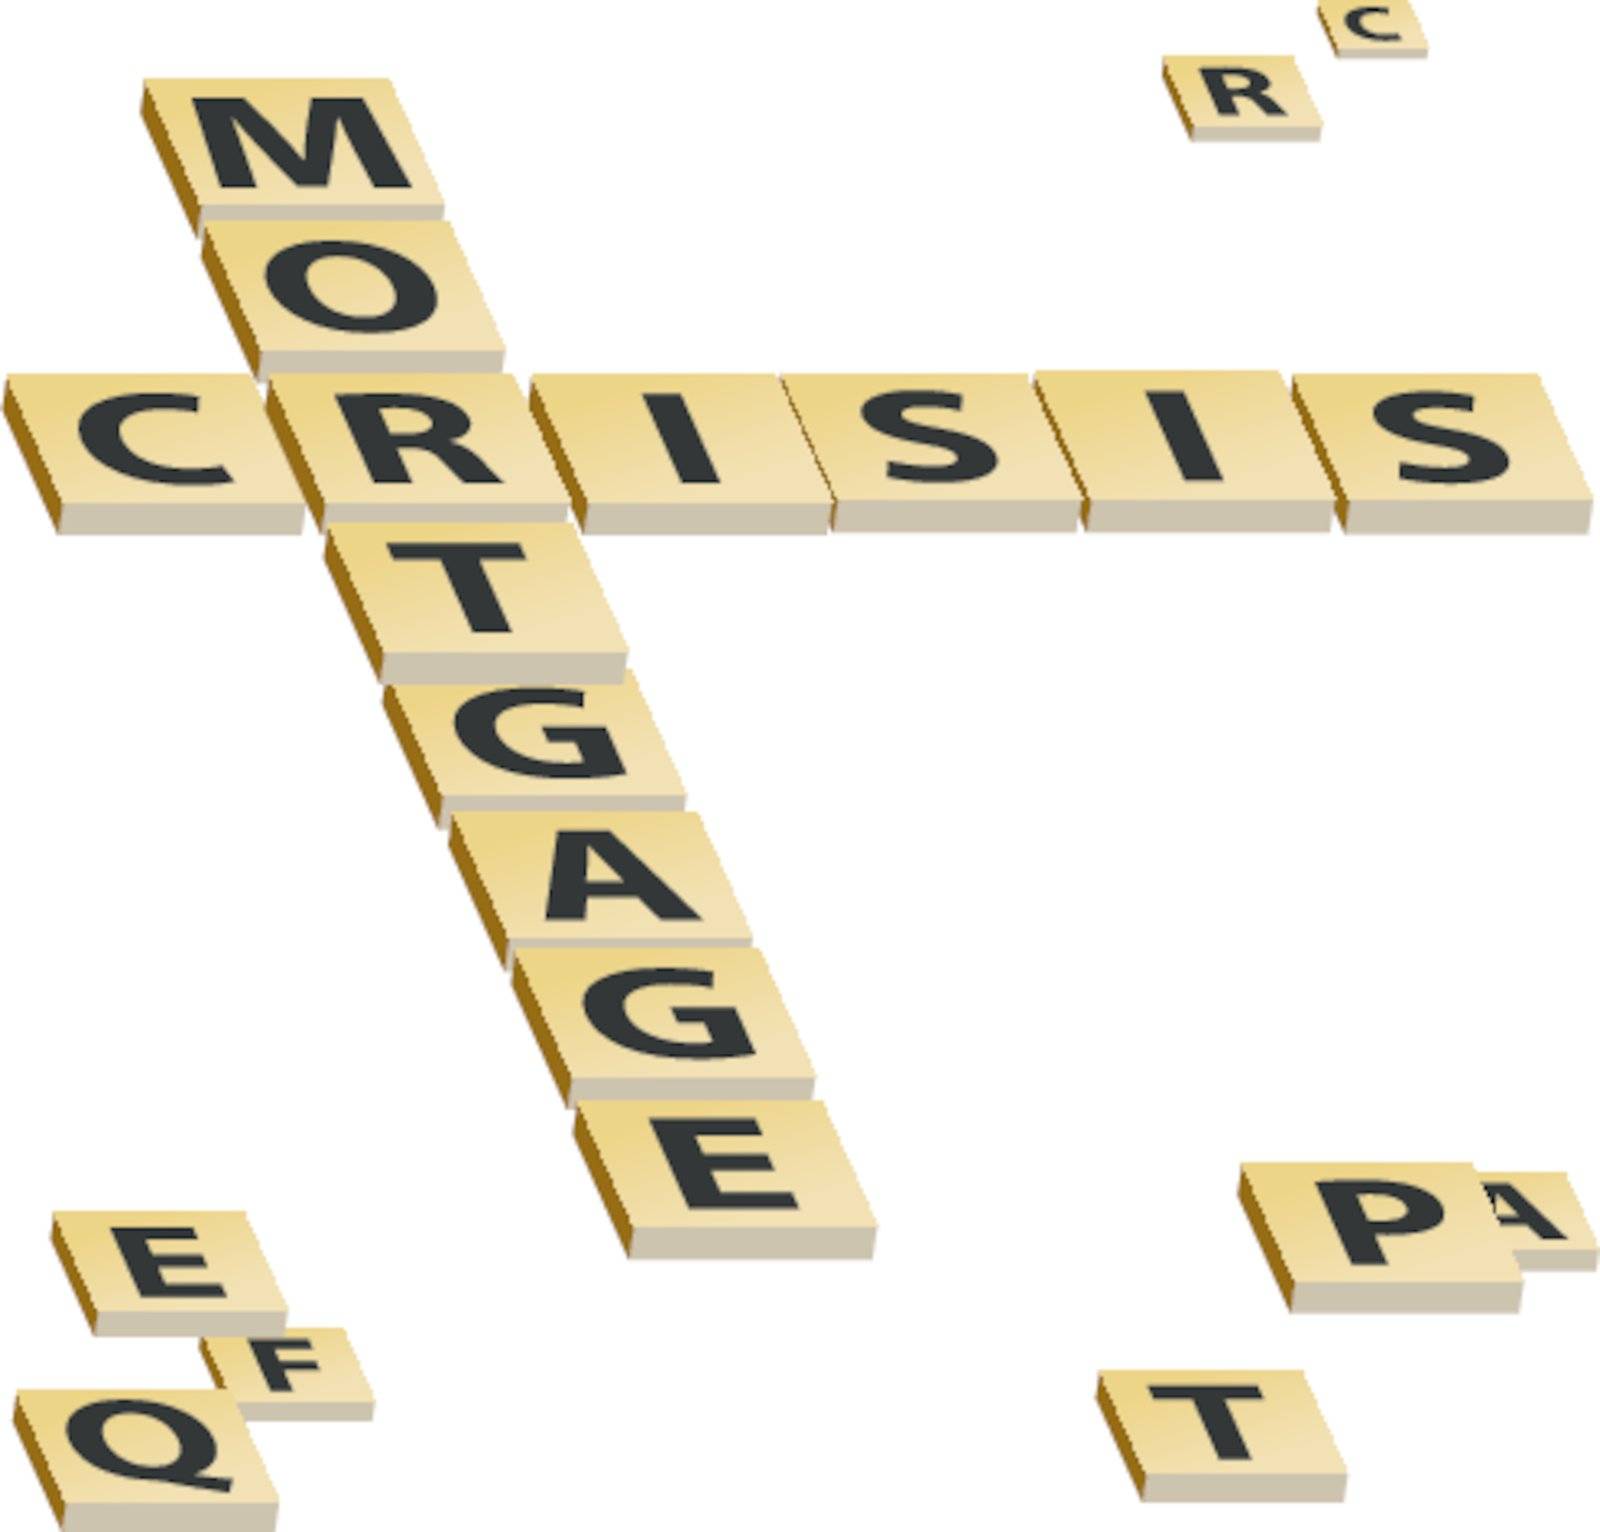 An image of a mortgage crisis crossword puzzle.